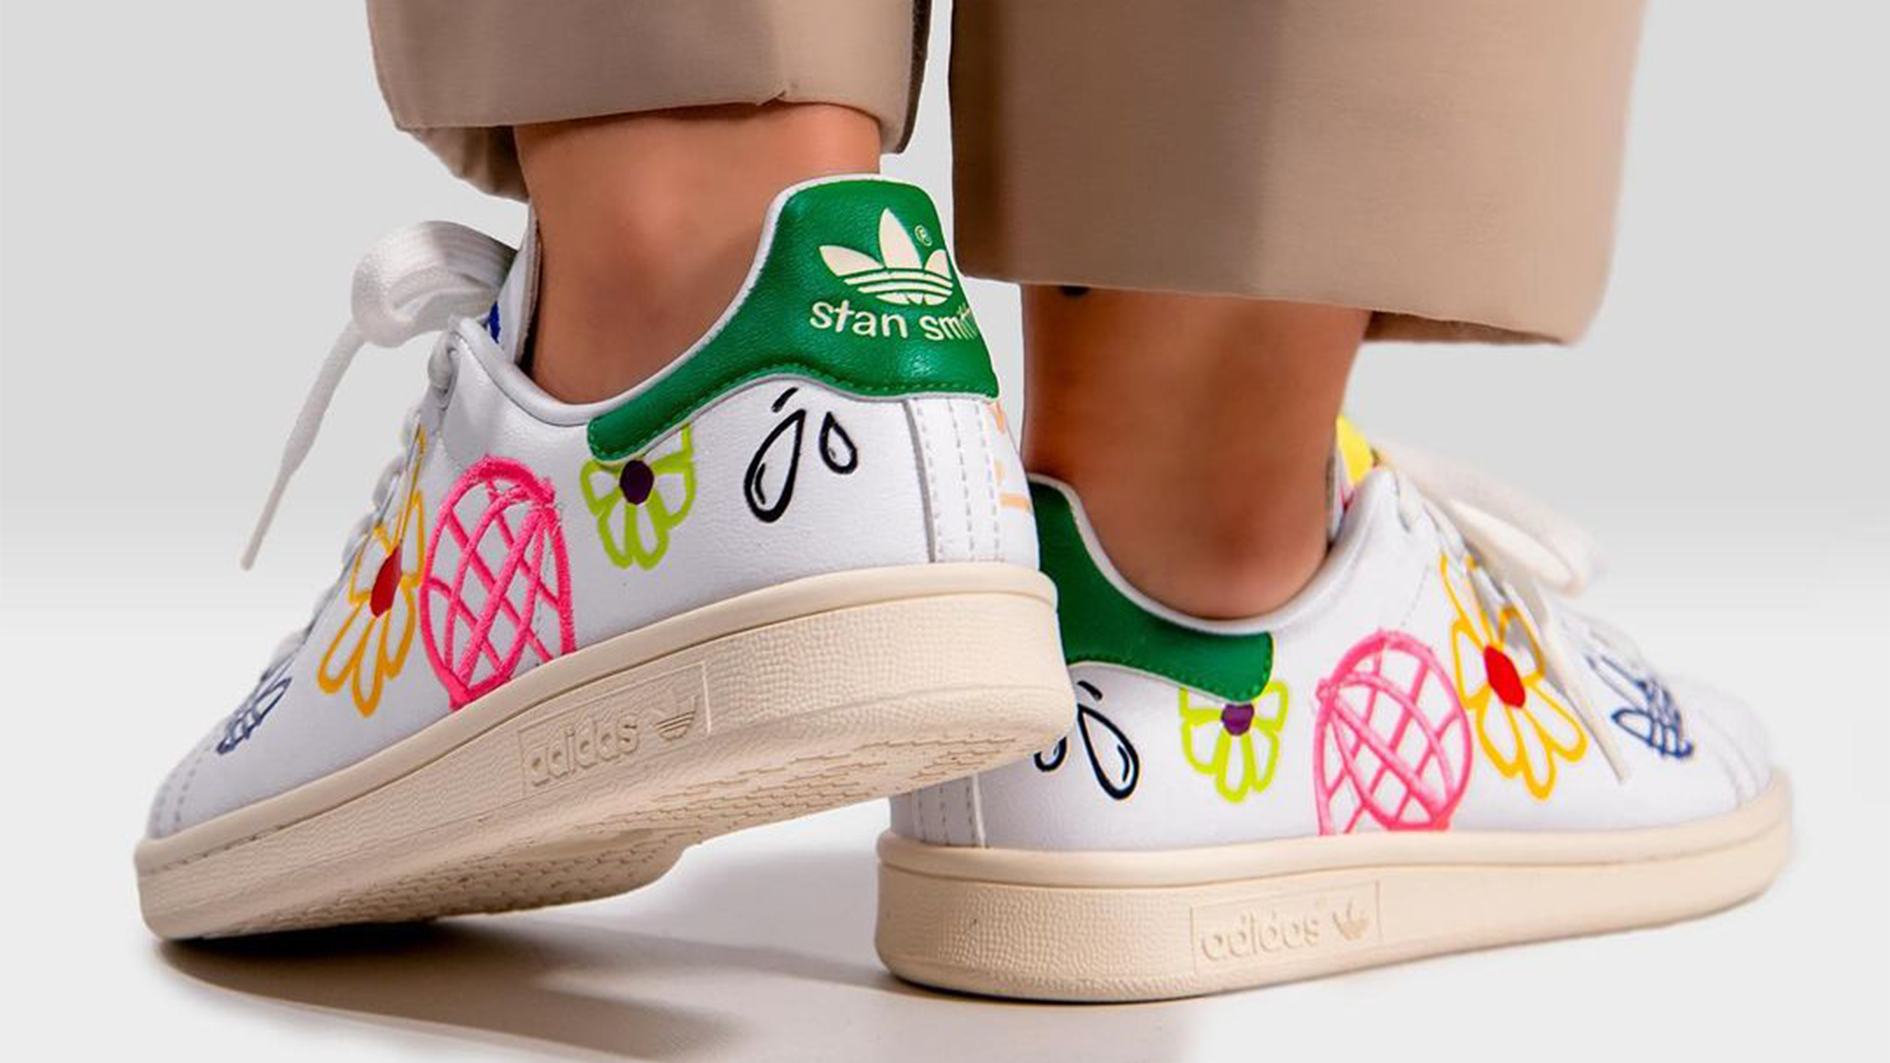 Stan Smith Sizing: How Do They Fit? | The Sole